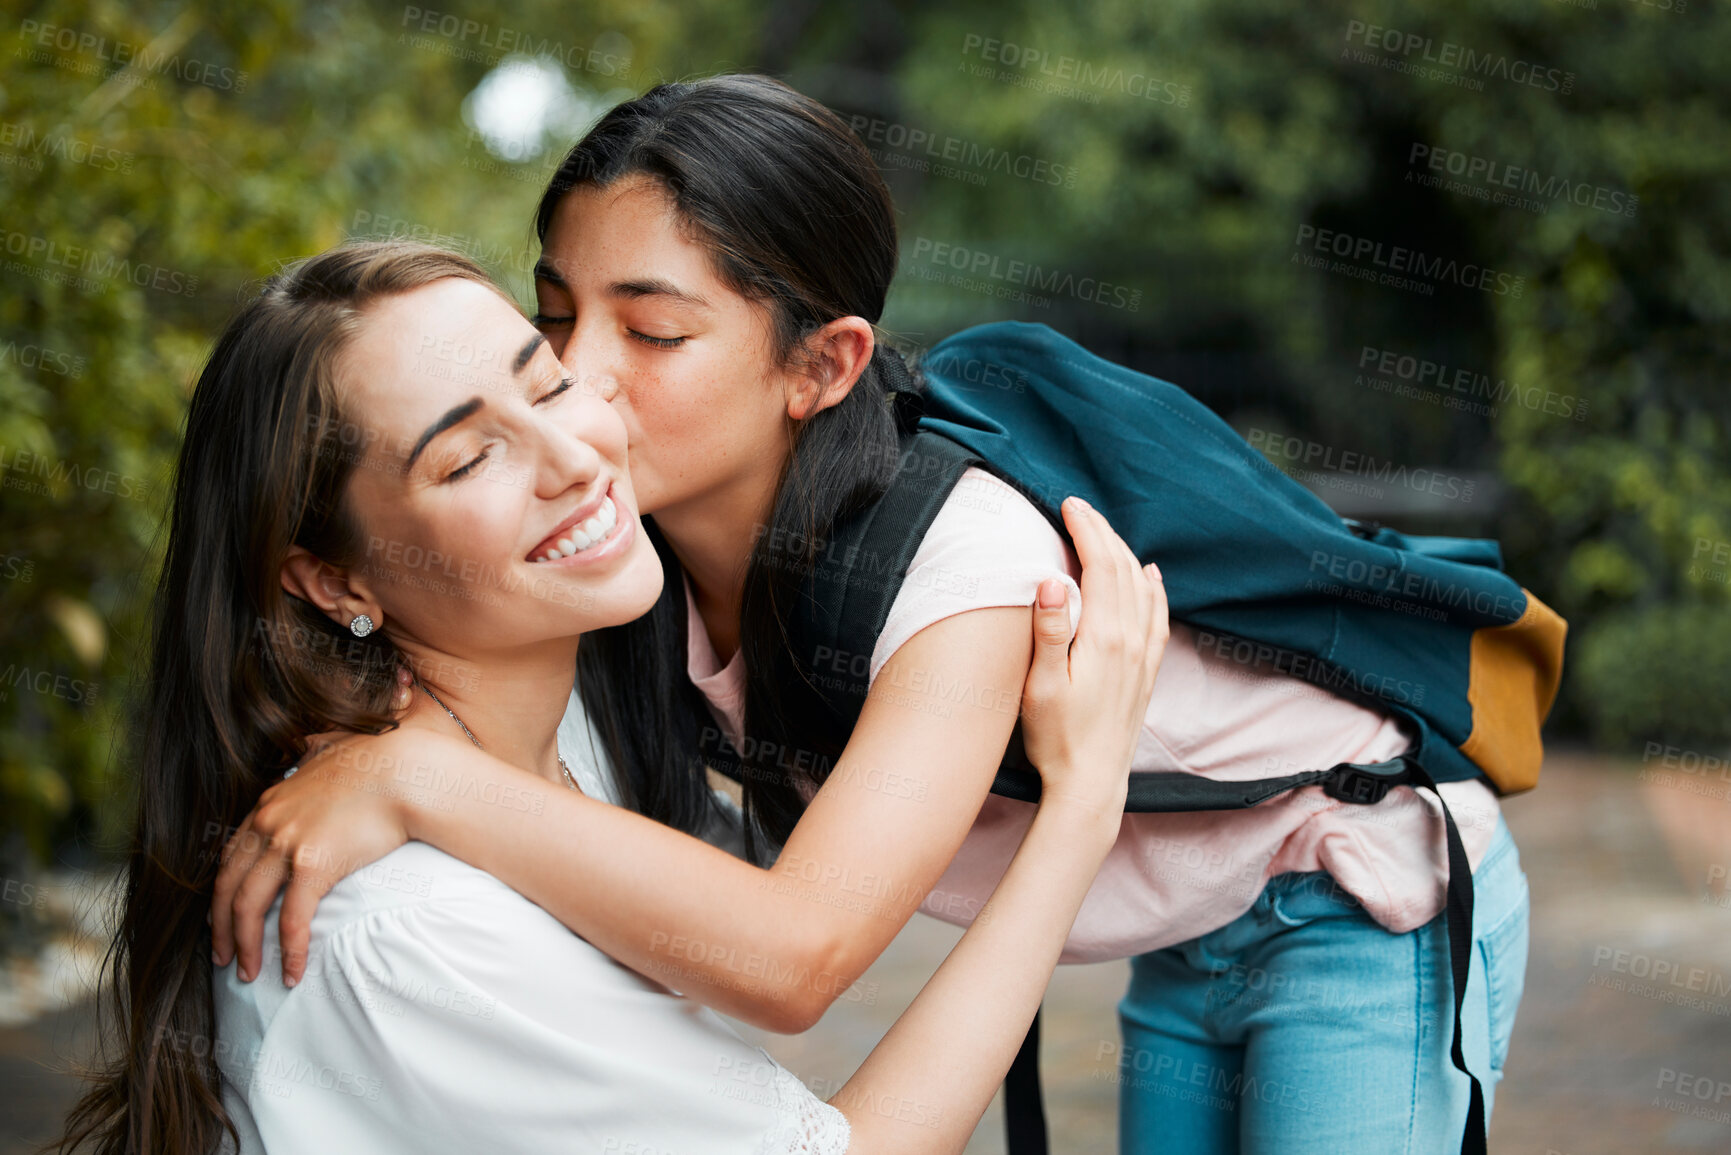 Buy stock photo Daughter, hugging and giving a kiss to her mom before going into school. Happy parent has strong relationship and cute bond with her child. Young girl shows love, affection and care for her mother.